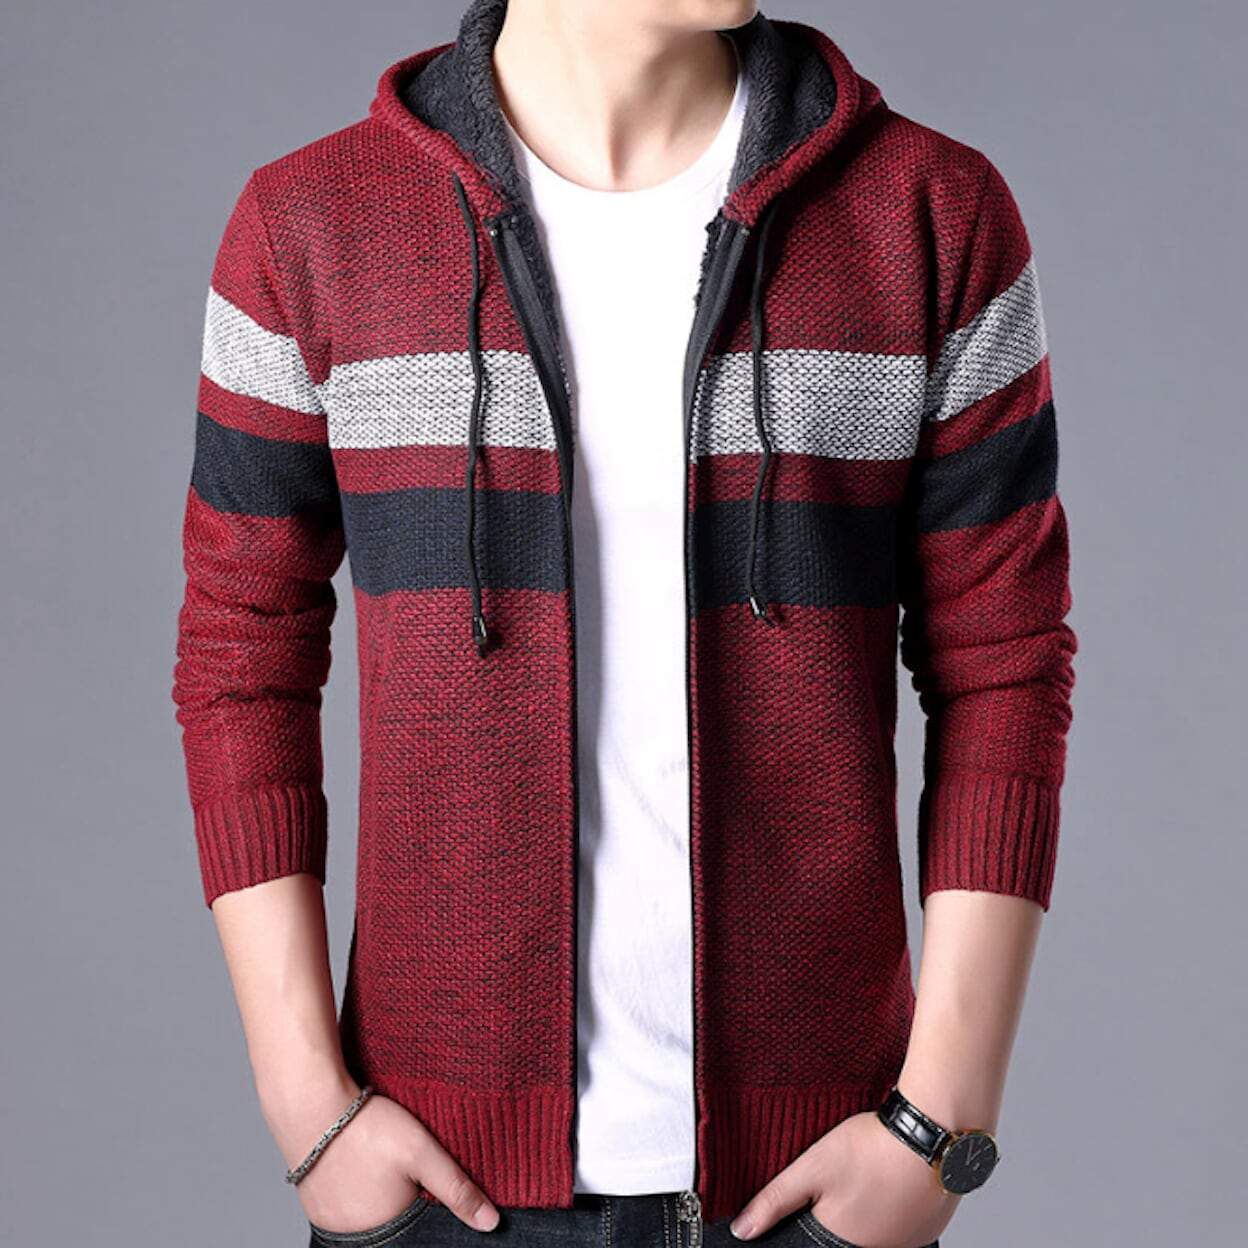 mens red polyester and cotton hooded zip up cardigan sweater - AmtifyDirect